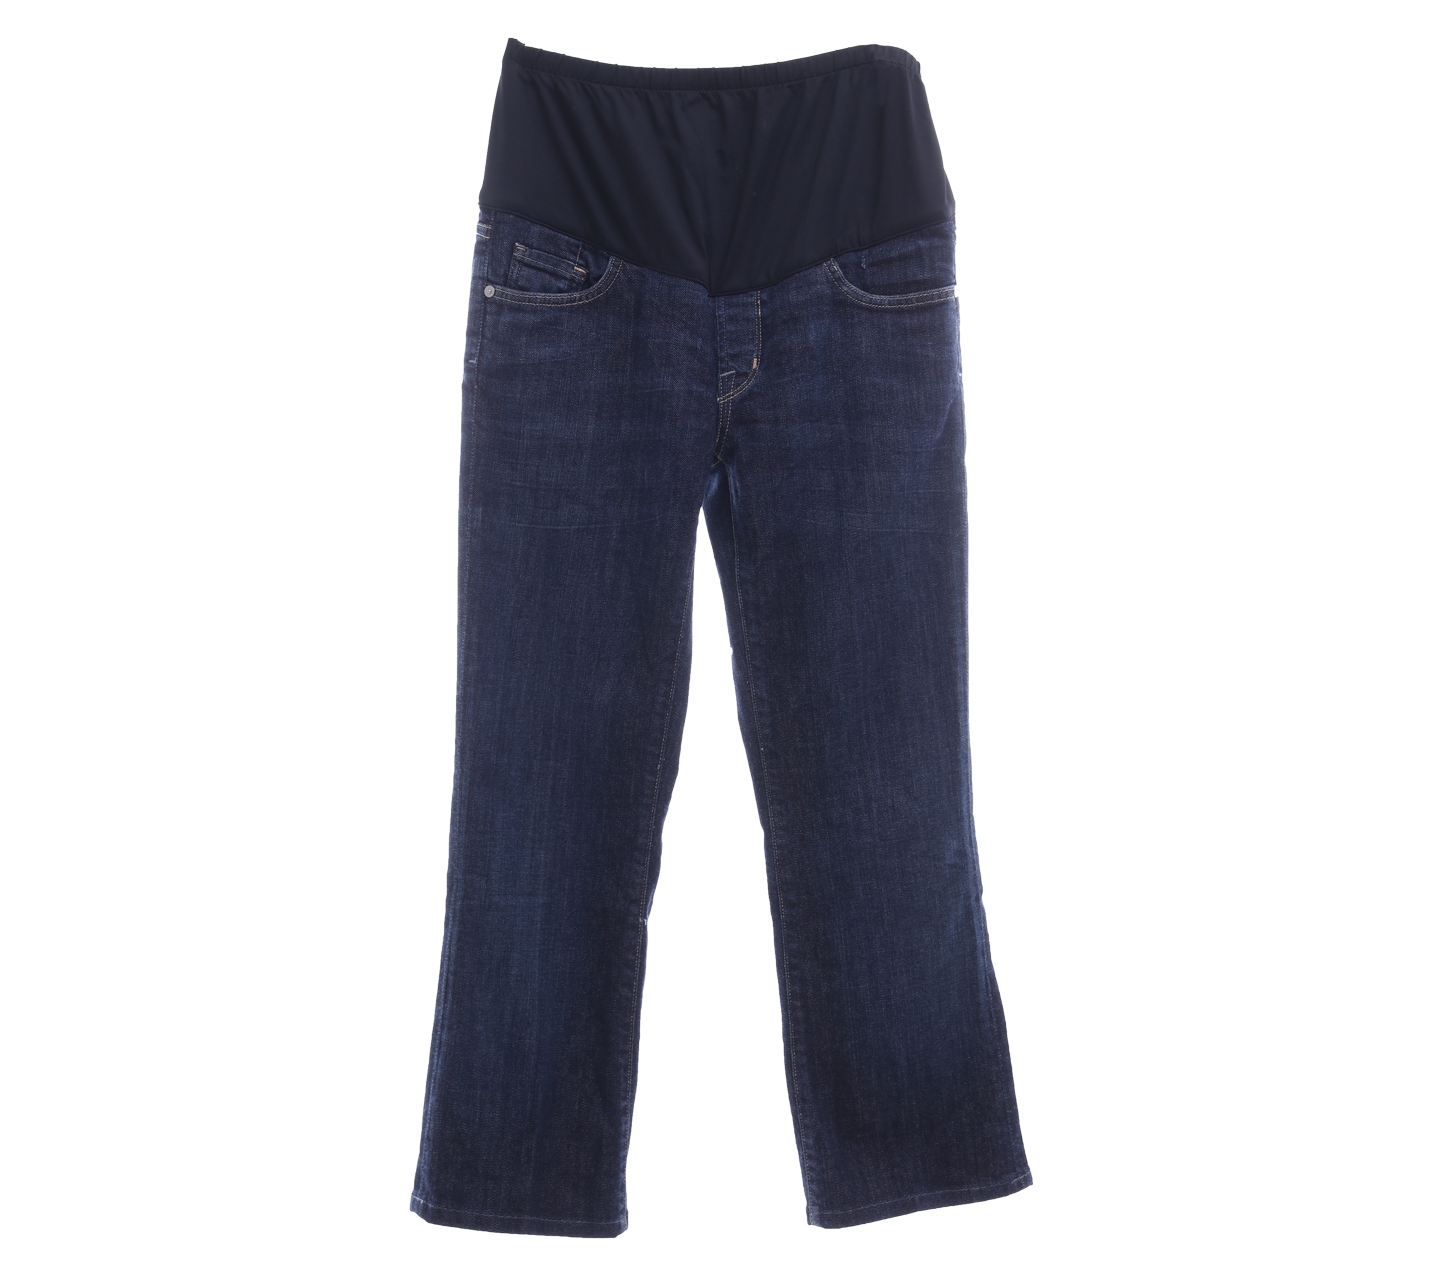 Citizen Of Humanity Dark Blue And Black Long Pants